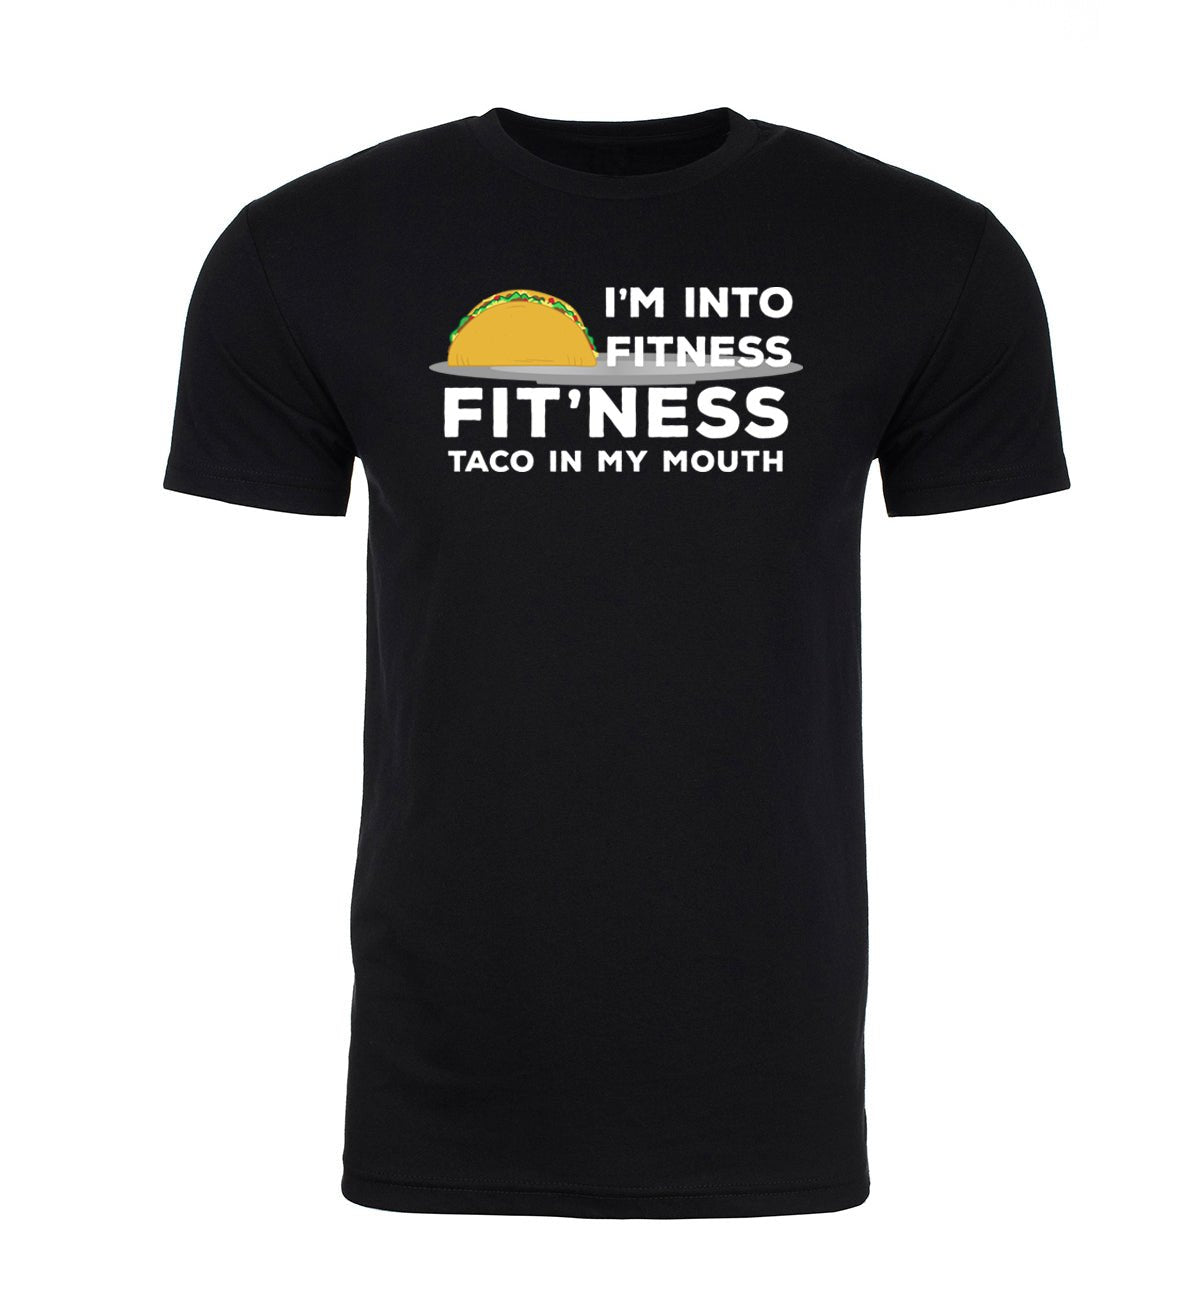 I'm Into Fitness - Fit'ness Taco in My Mouth - Unisex T Shirts - Mato & Hash